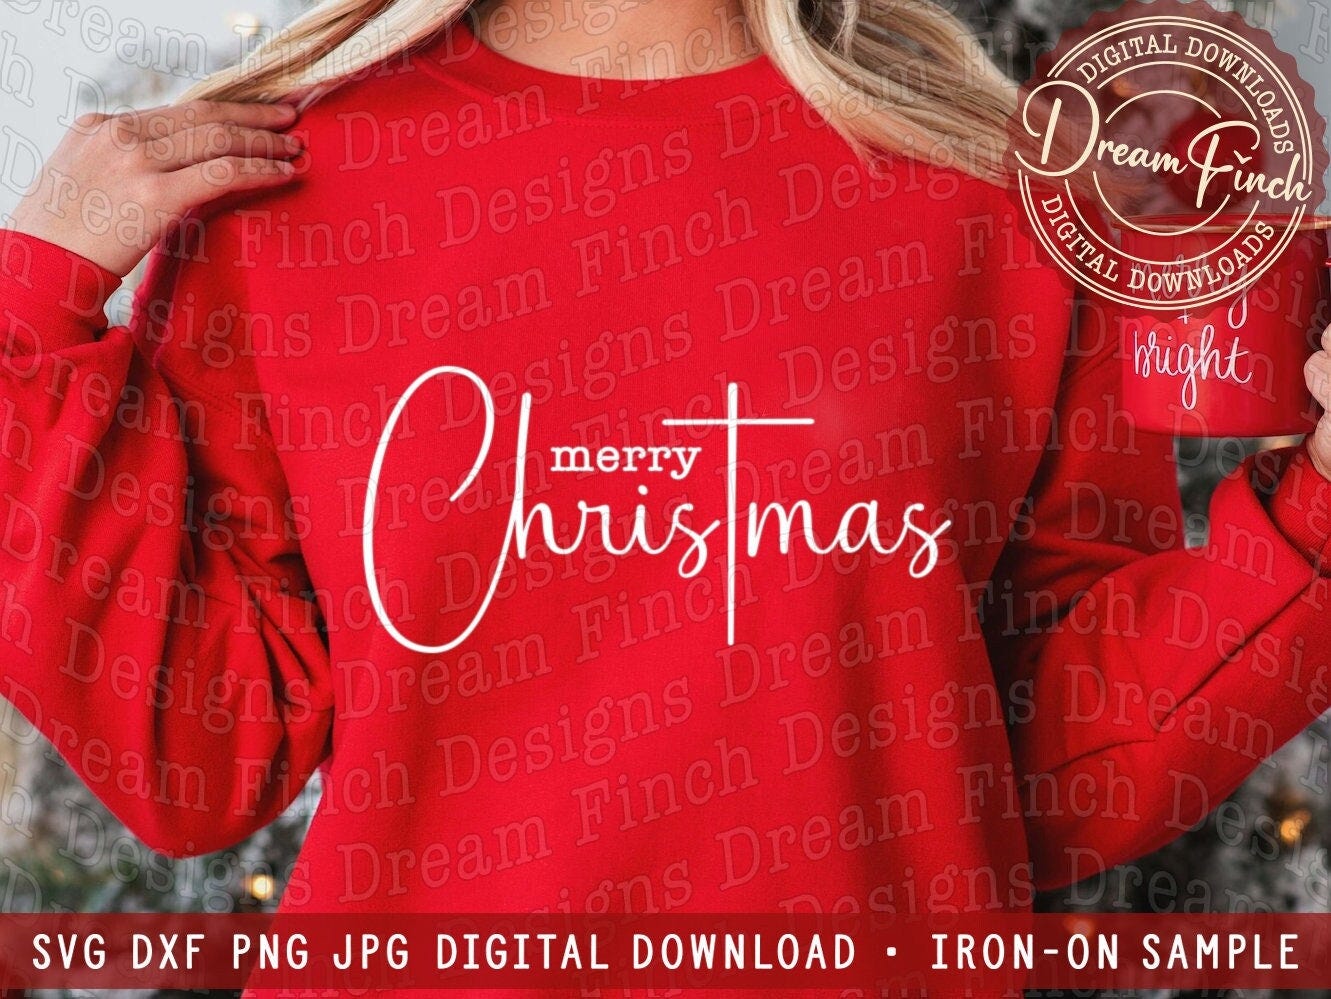 Merry Christmas SVG DXF PNG Jpg for Religious Cross T-Shirt - Digital Download